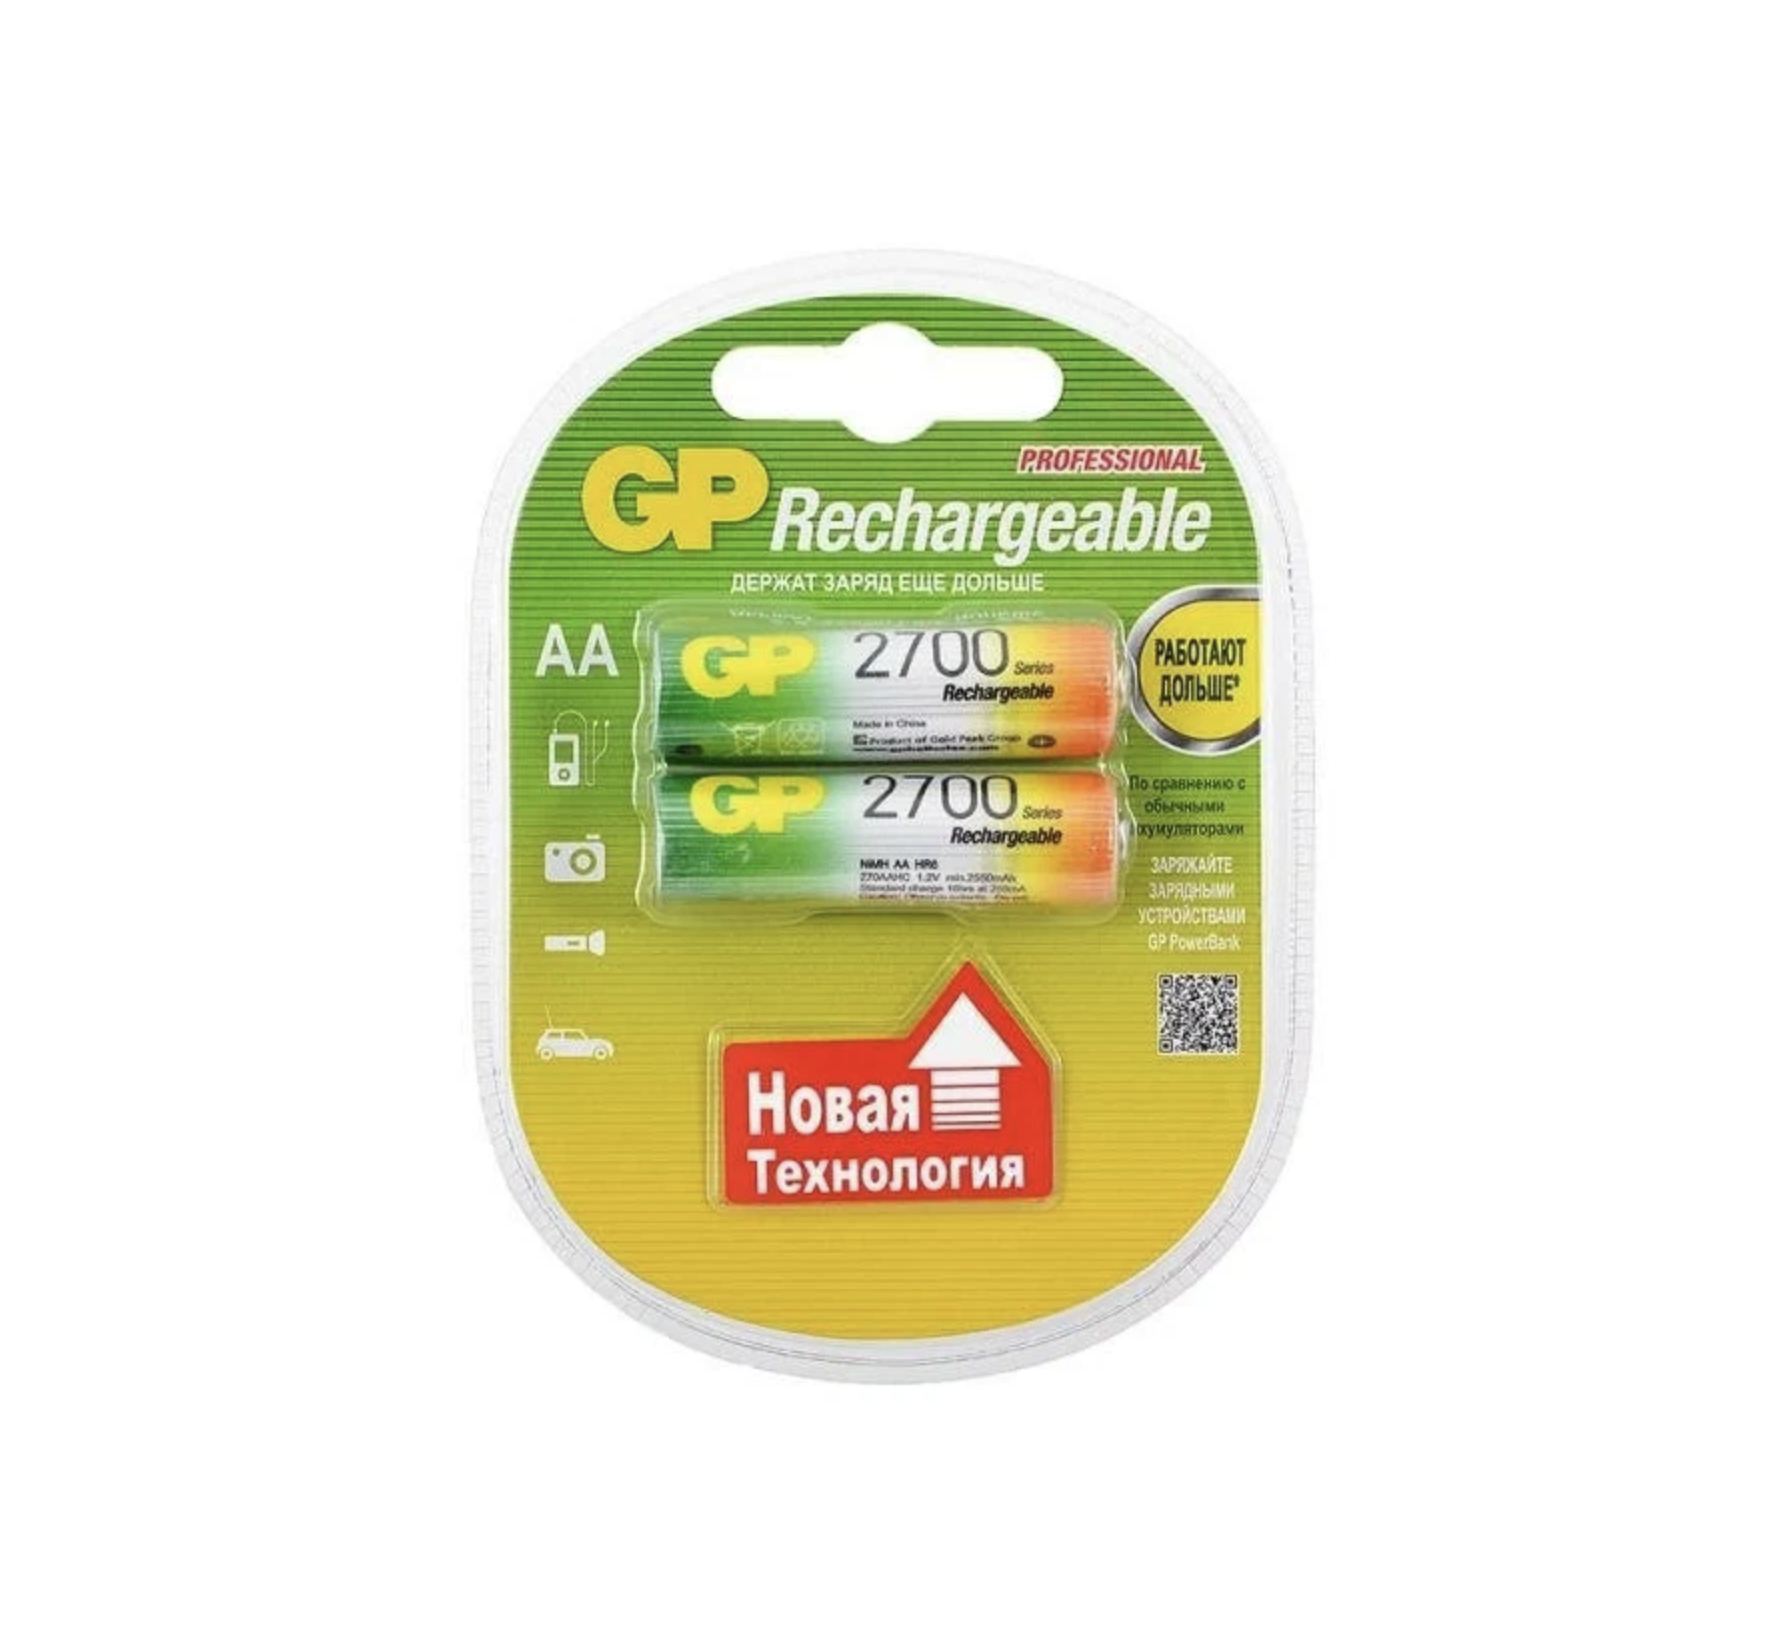  GP -  Rechargeable AA 2700 / 270AAHC 2 